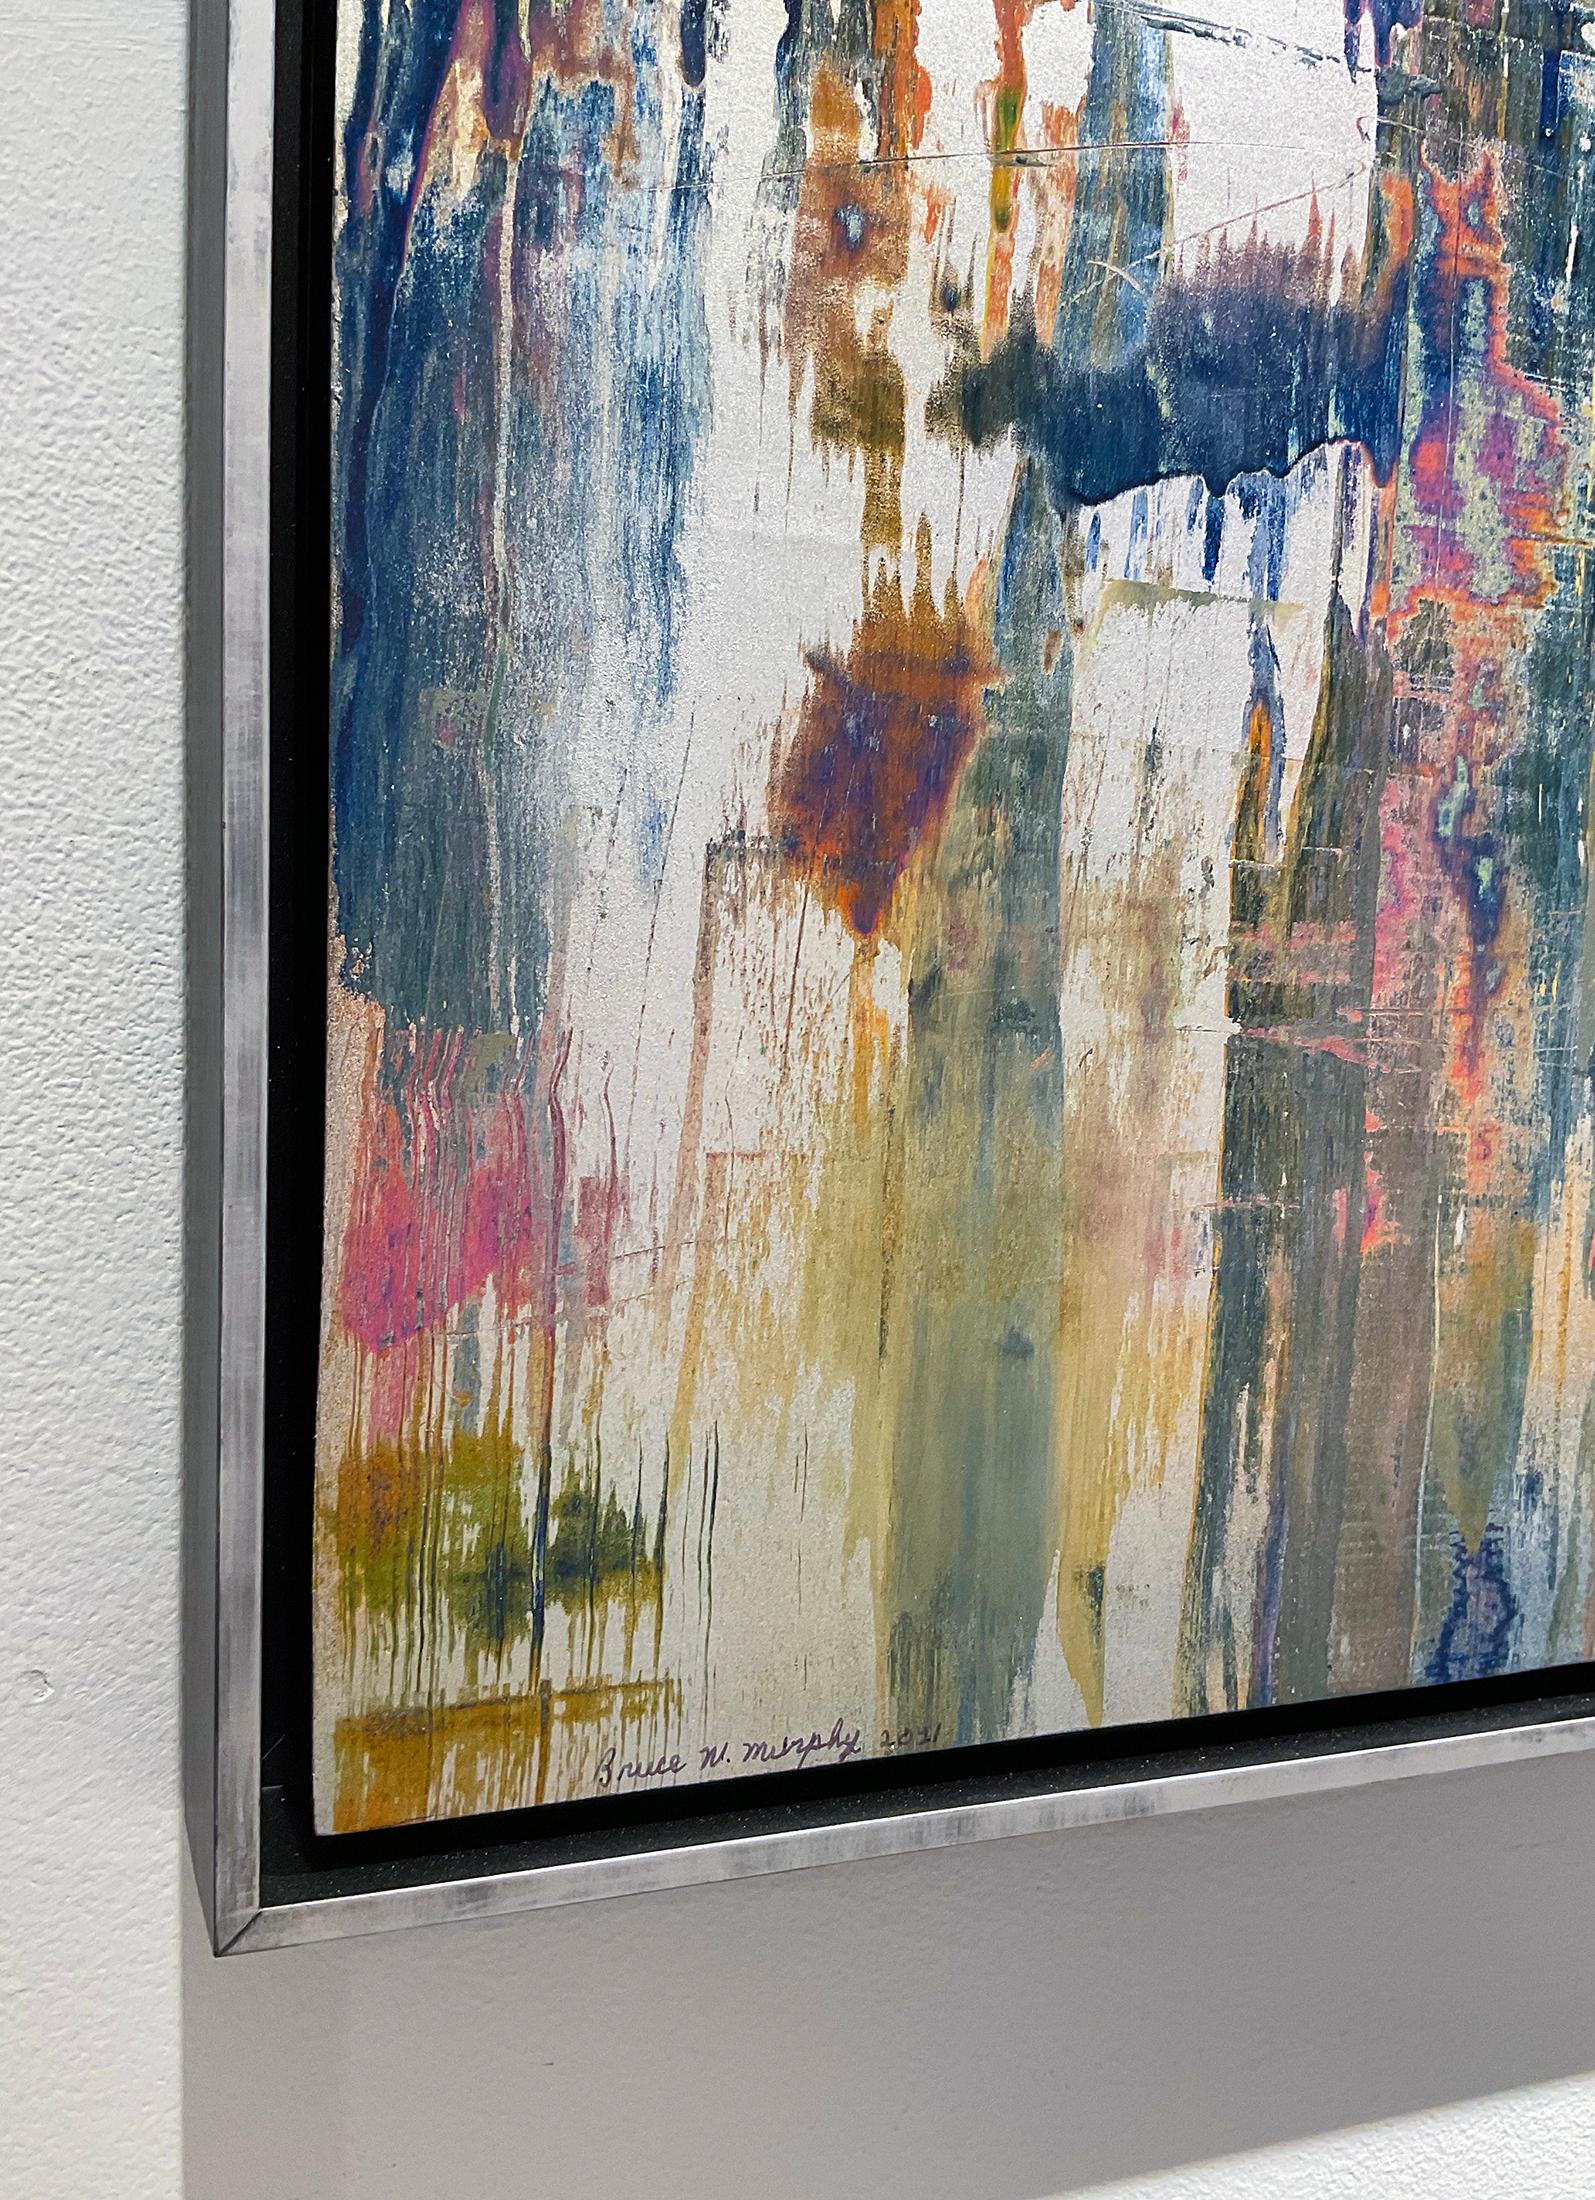 Colorful Abstract painting made with blue, pink, orange, and green enamel paint under silver and gold metallic powders
Abstract expressionist painting in the style of Gerhard Richter 
